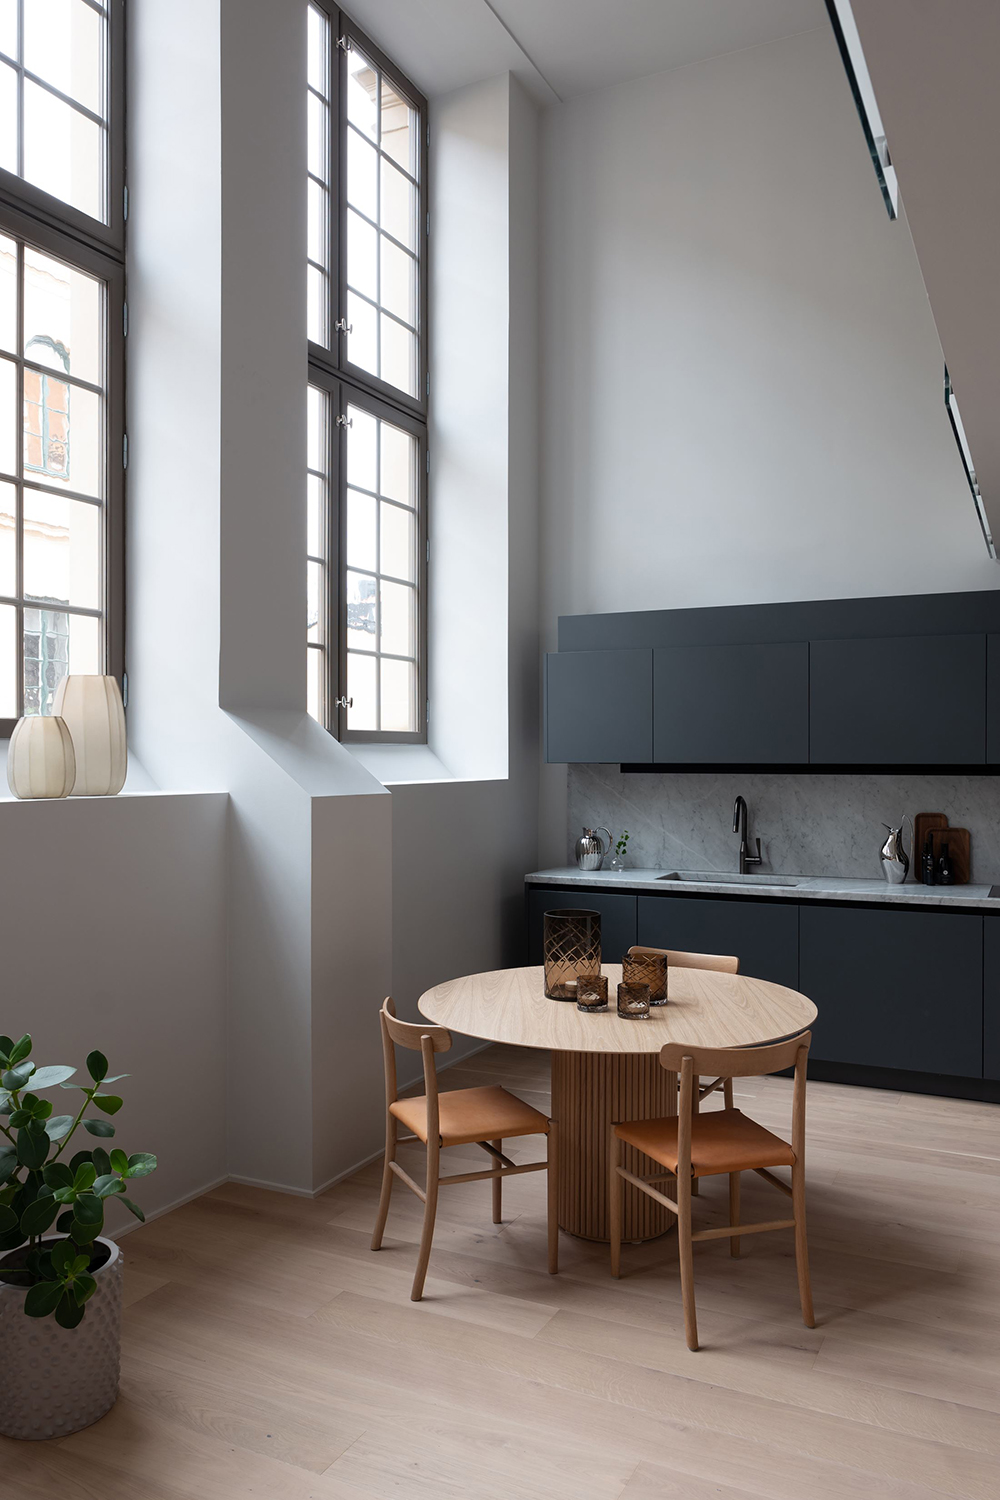 Minimal kitchen with carrara marble and bold midnight blue units